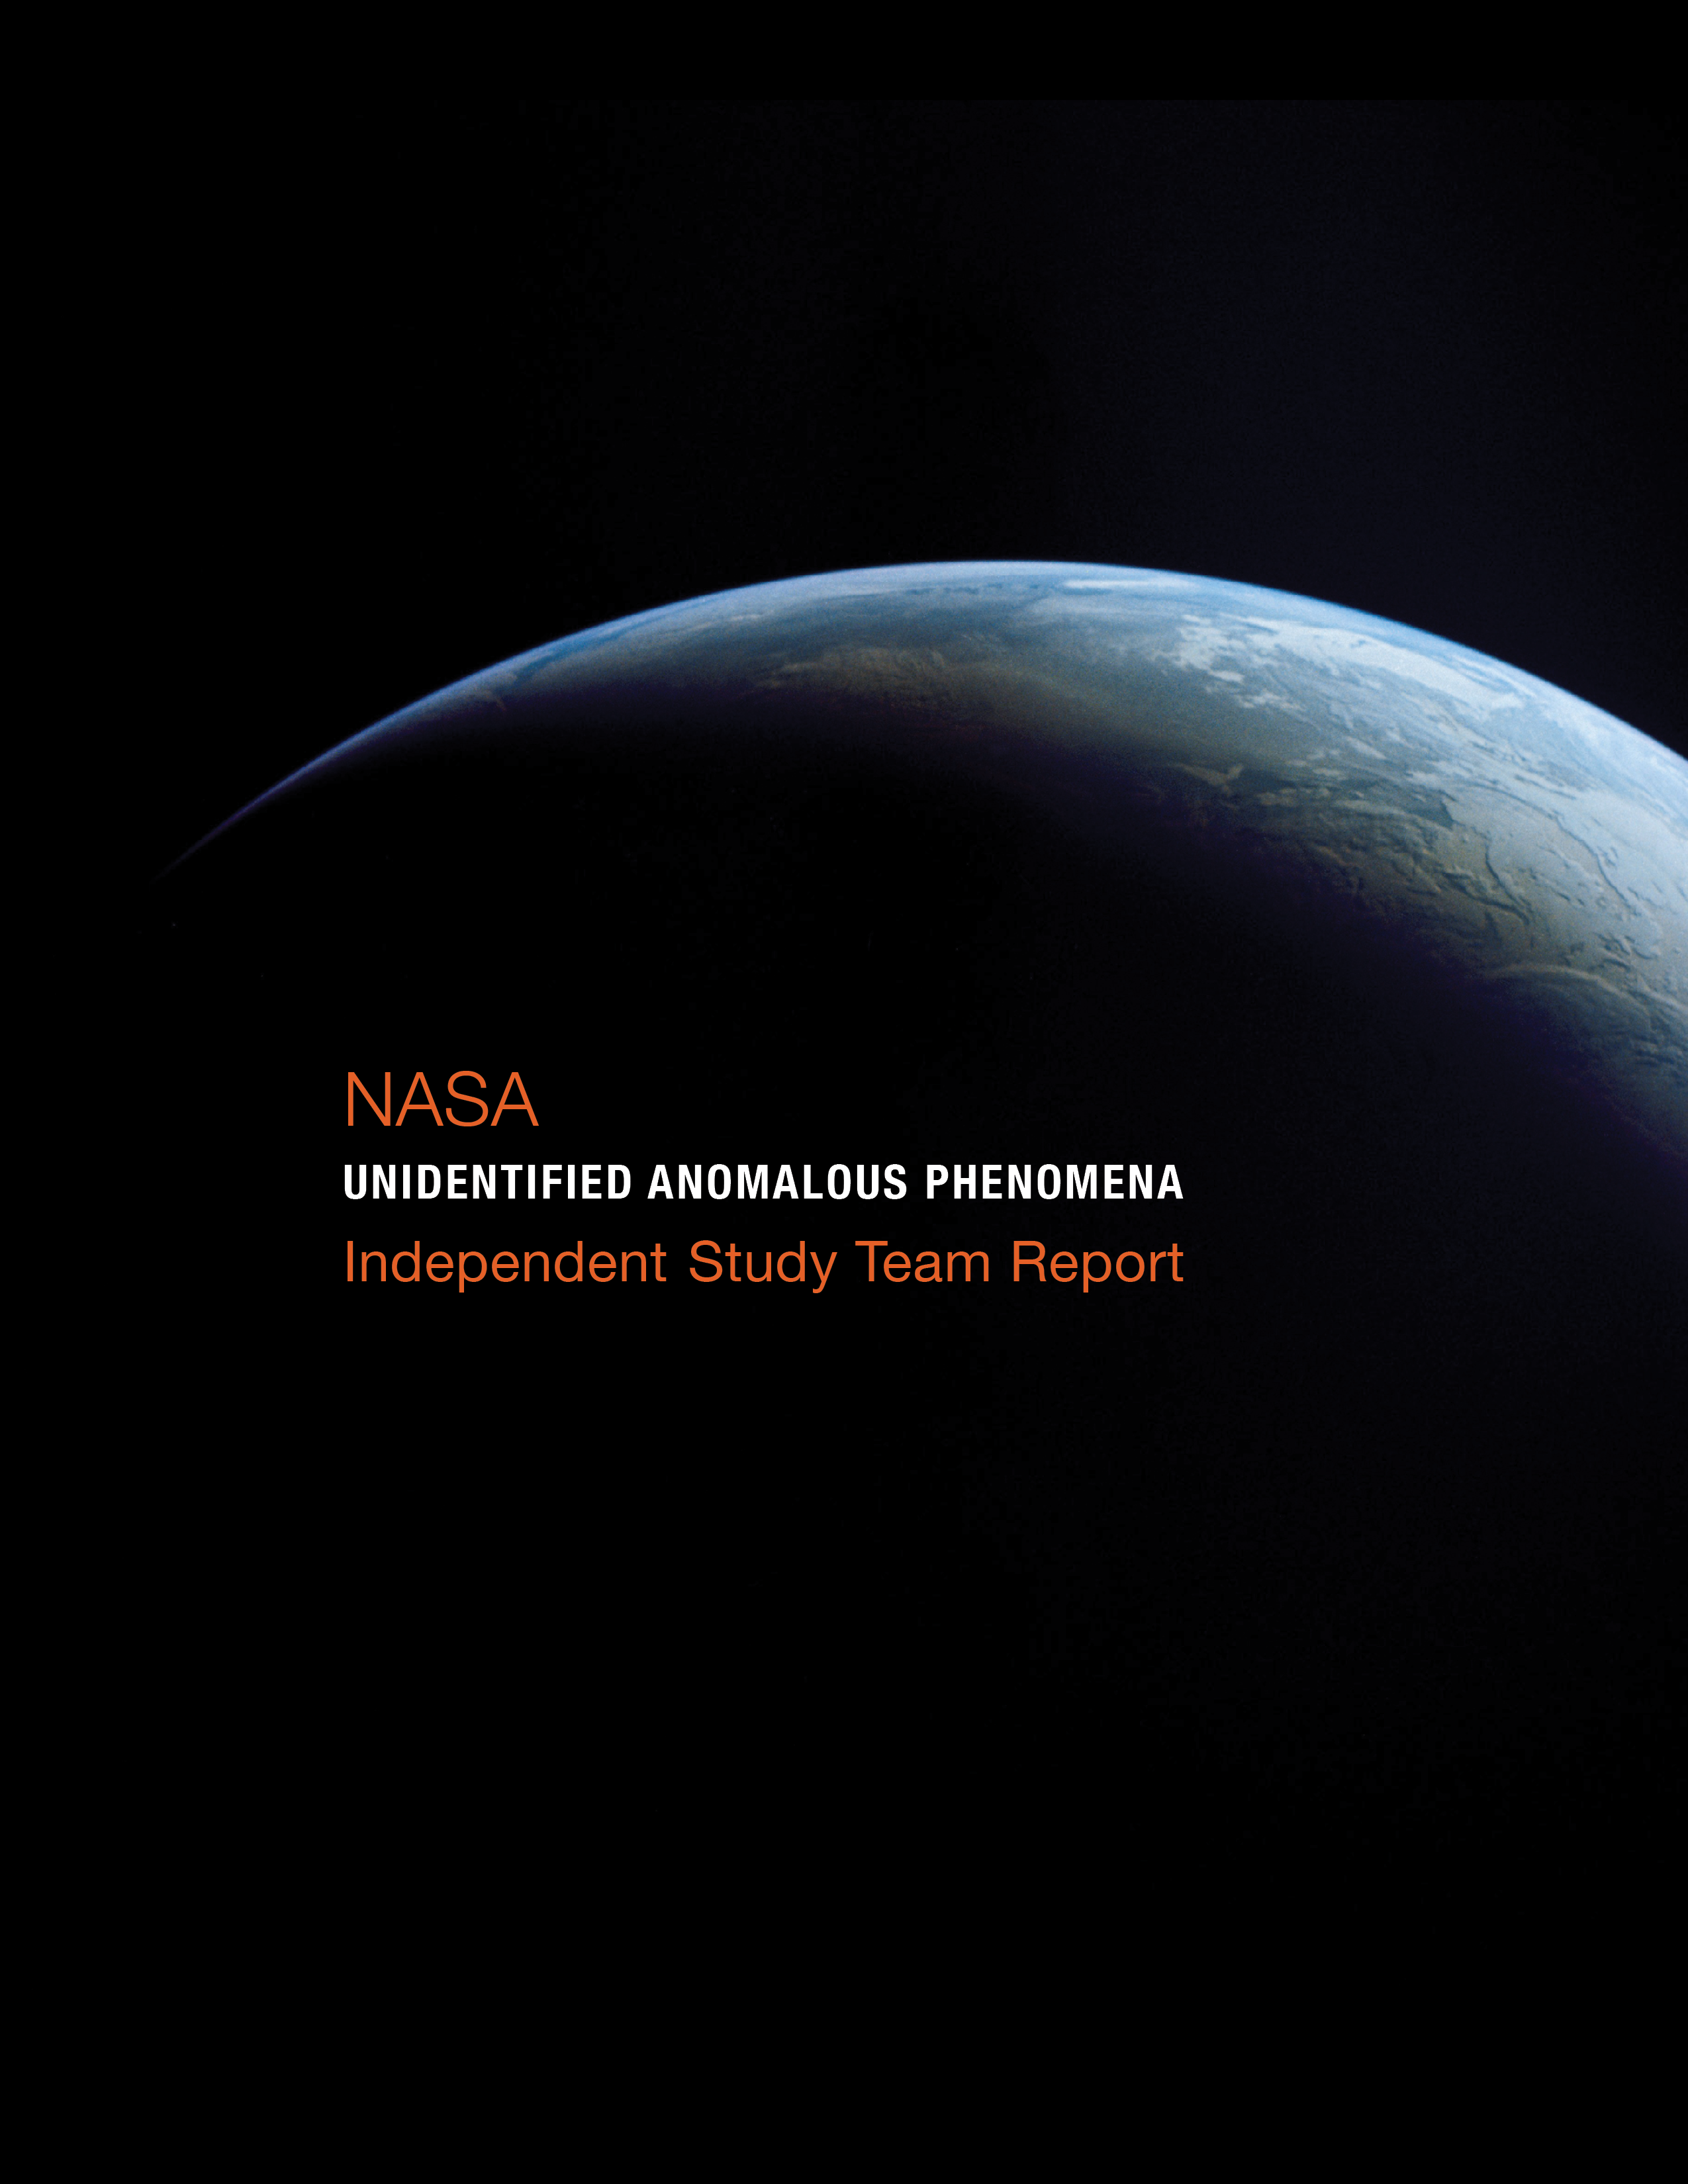 The northern hemisphere of the earth is highlighted with the rest fading to a black background. Title text reads "NASA Unidentified Anomalous Phenomena Independent Study Team Report"